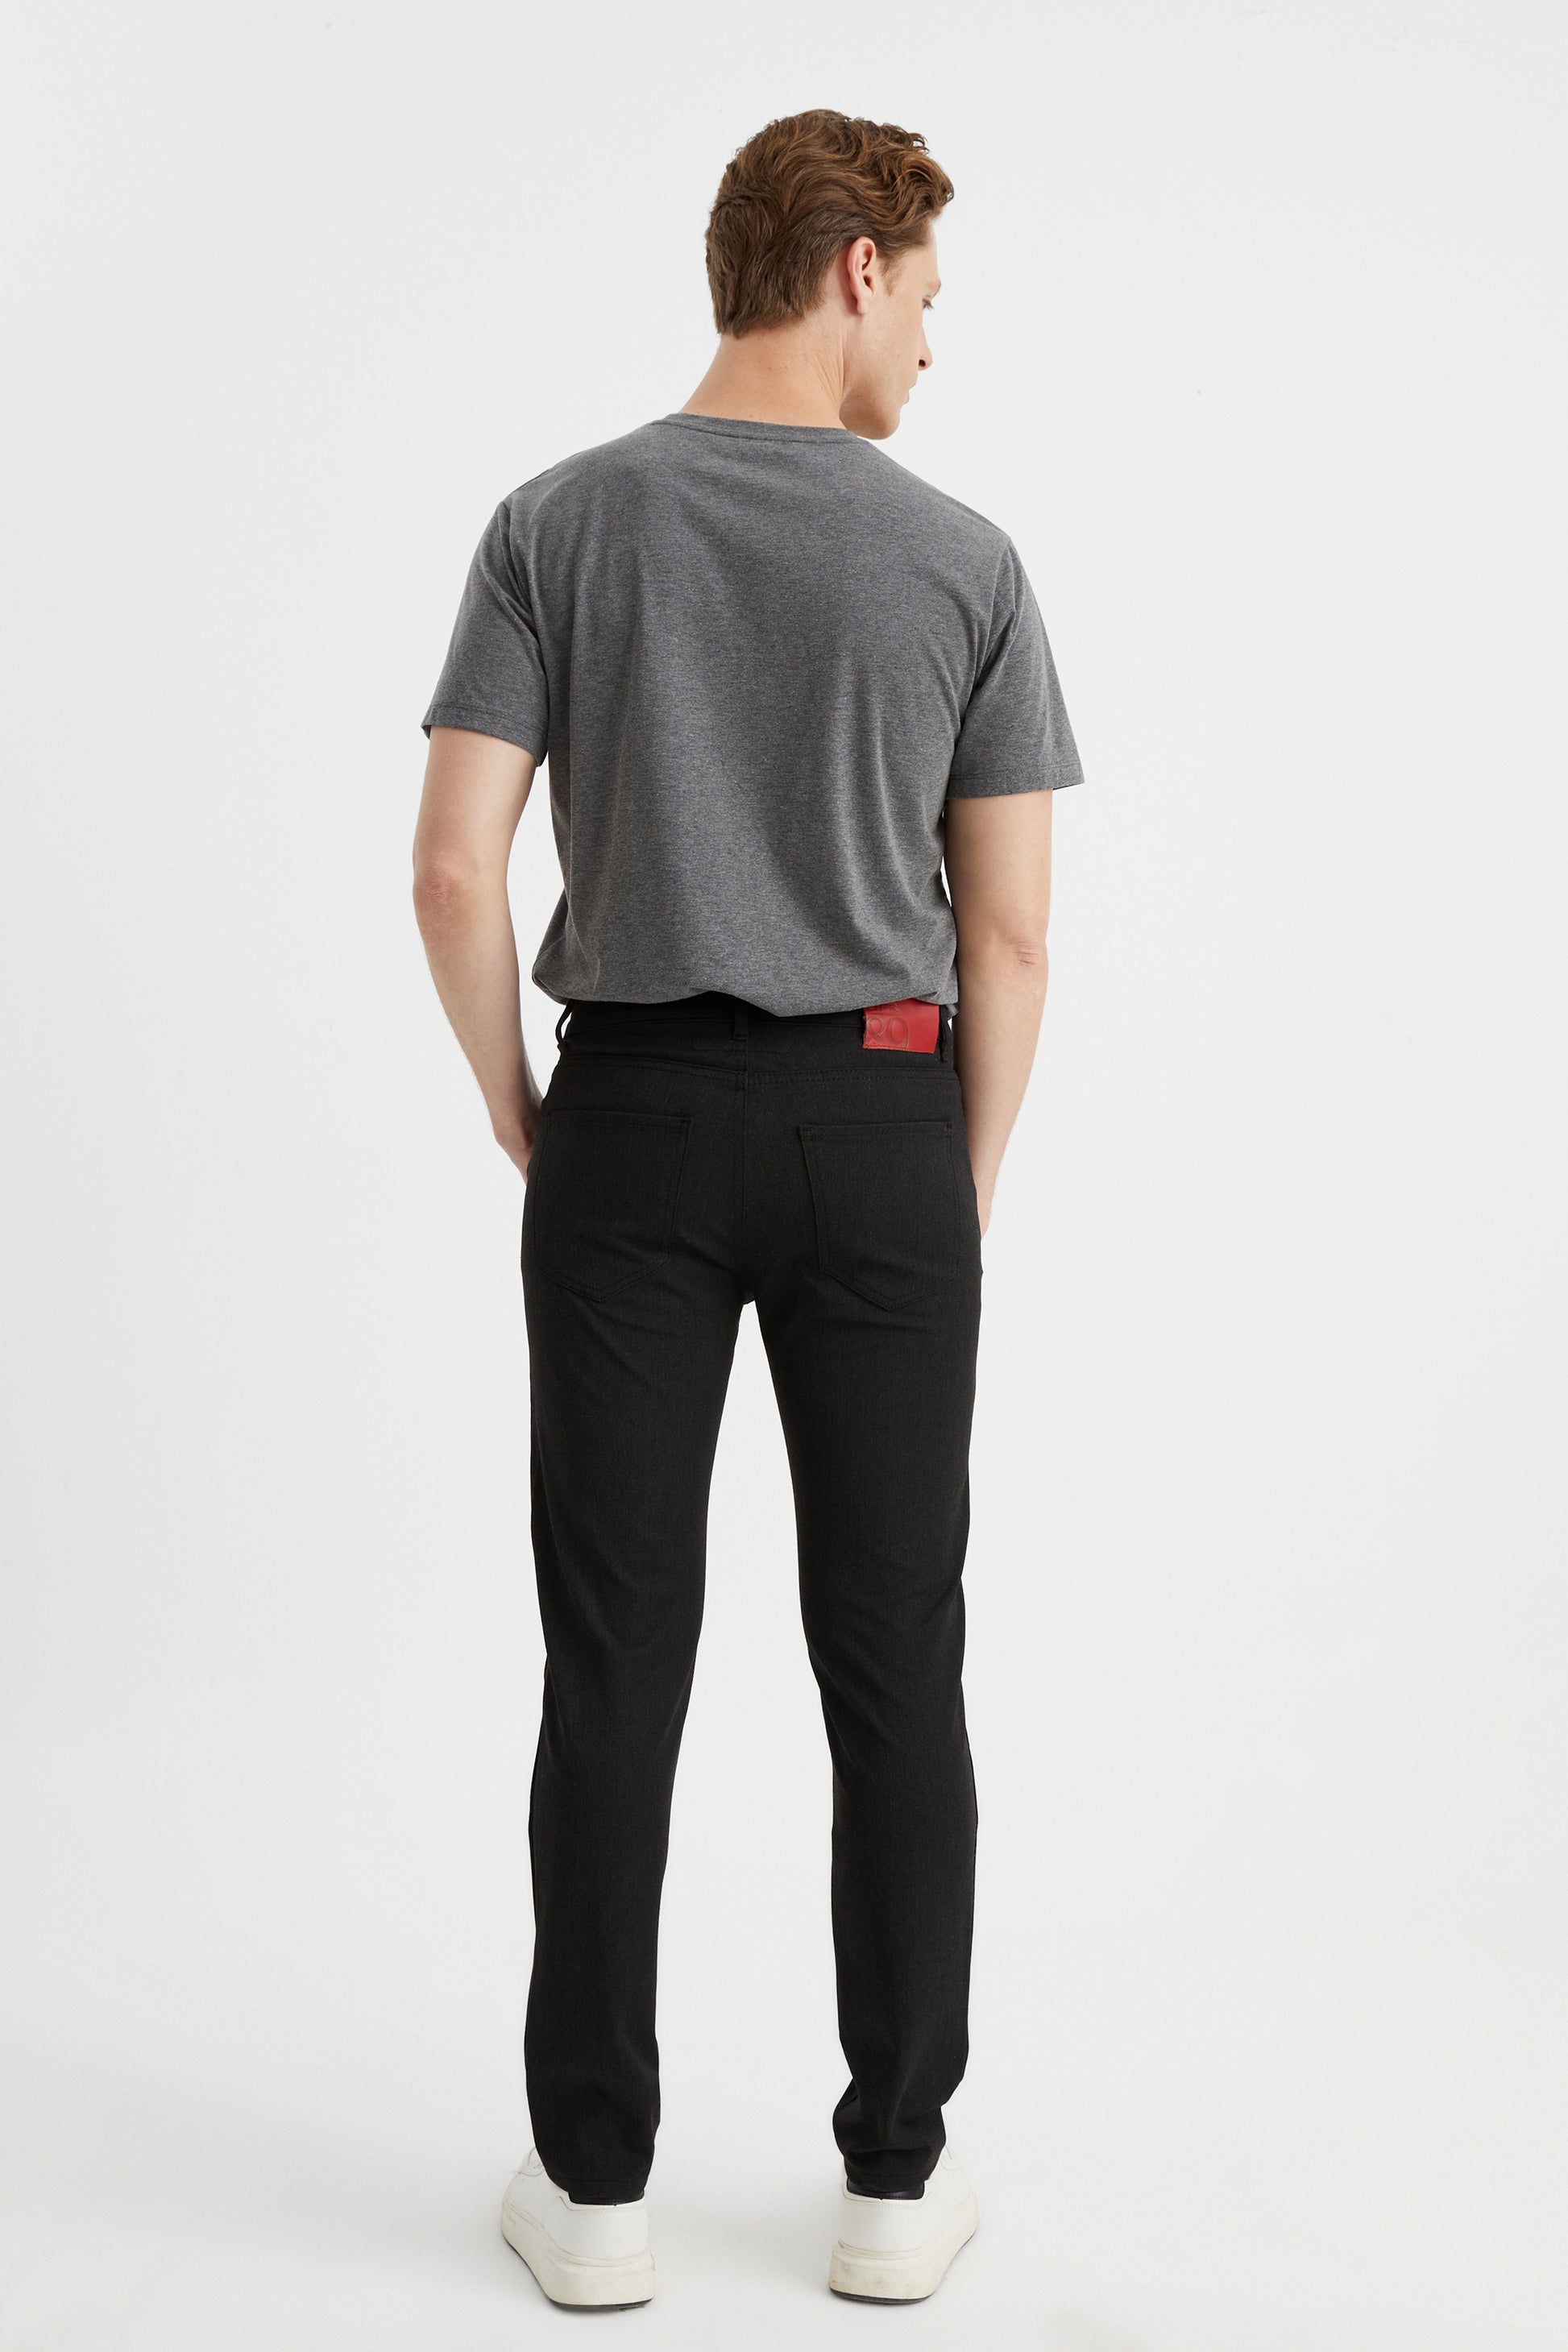 DFR89 men's slim grey dress pants. Wrinkle resistant and stretchy, for the ultimate combination of style and comfort.